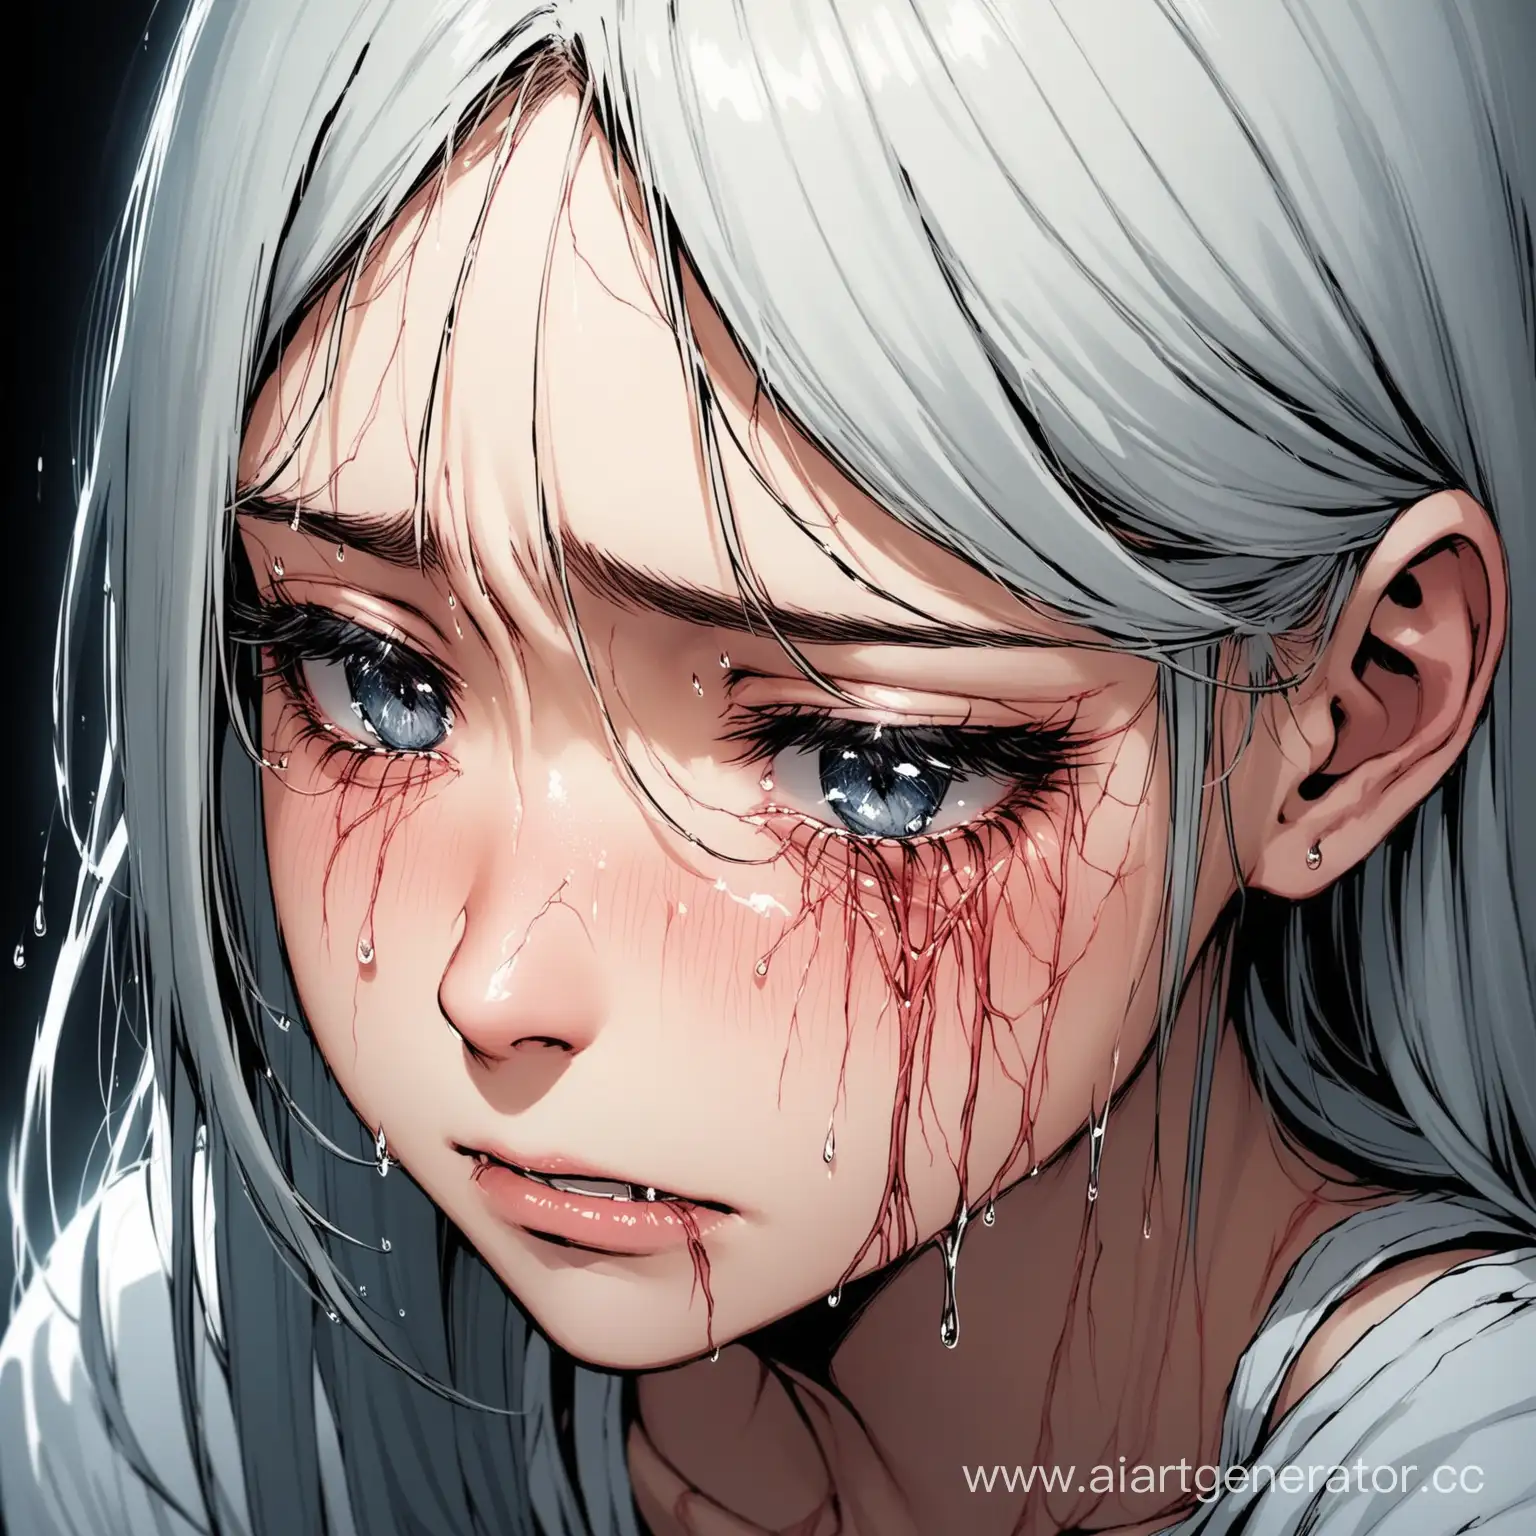 Sorrowful-Girl-with-TearStreaked-Face-and-SelfHarm-Scars